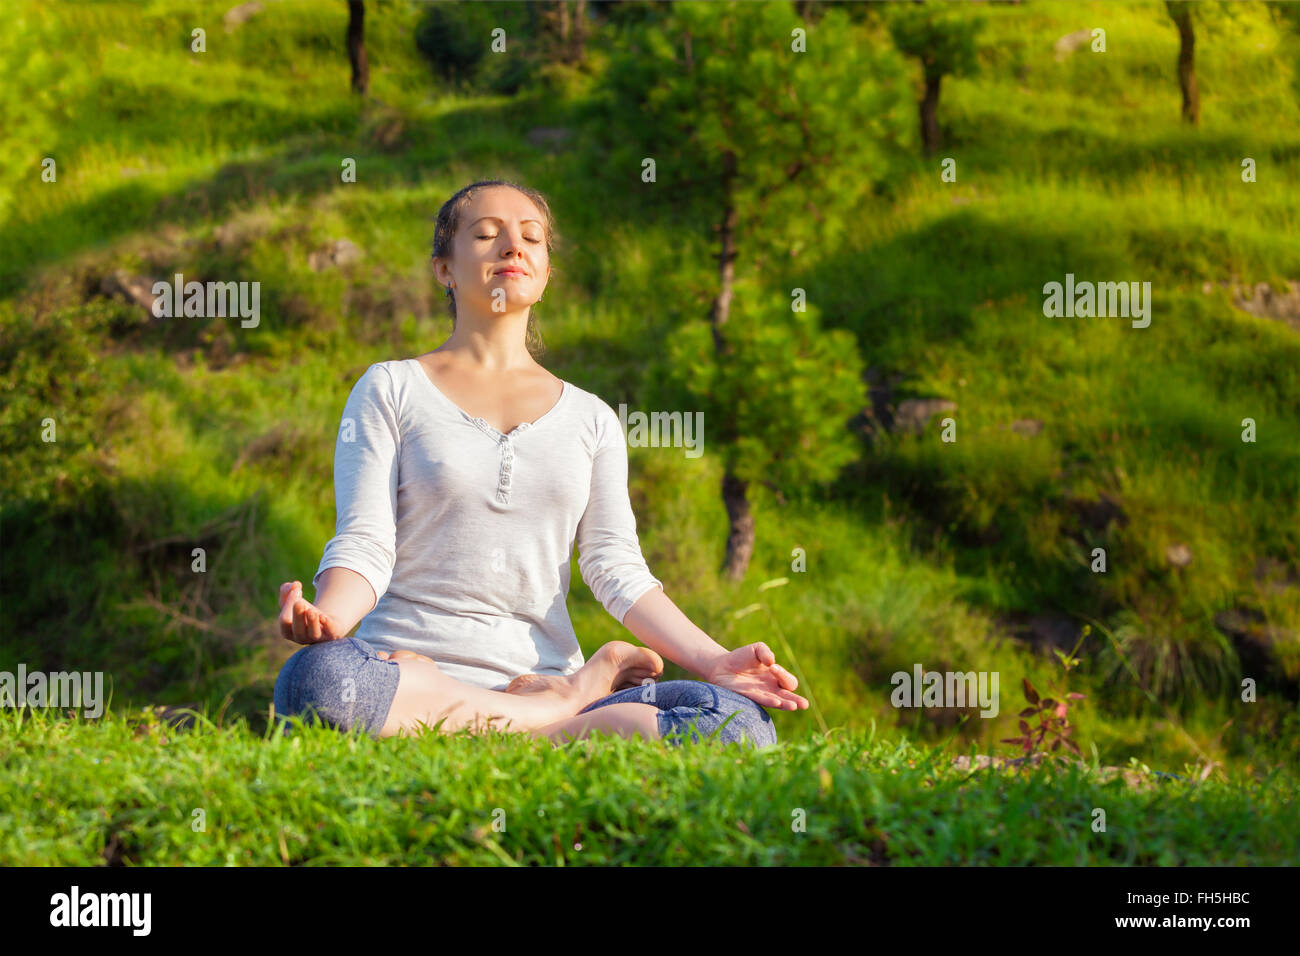 Young fit woman in yoga pose Lotus oudoors Banque D'Images